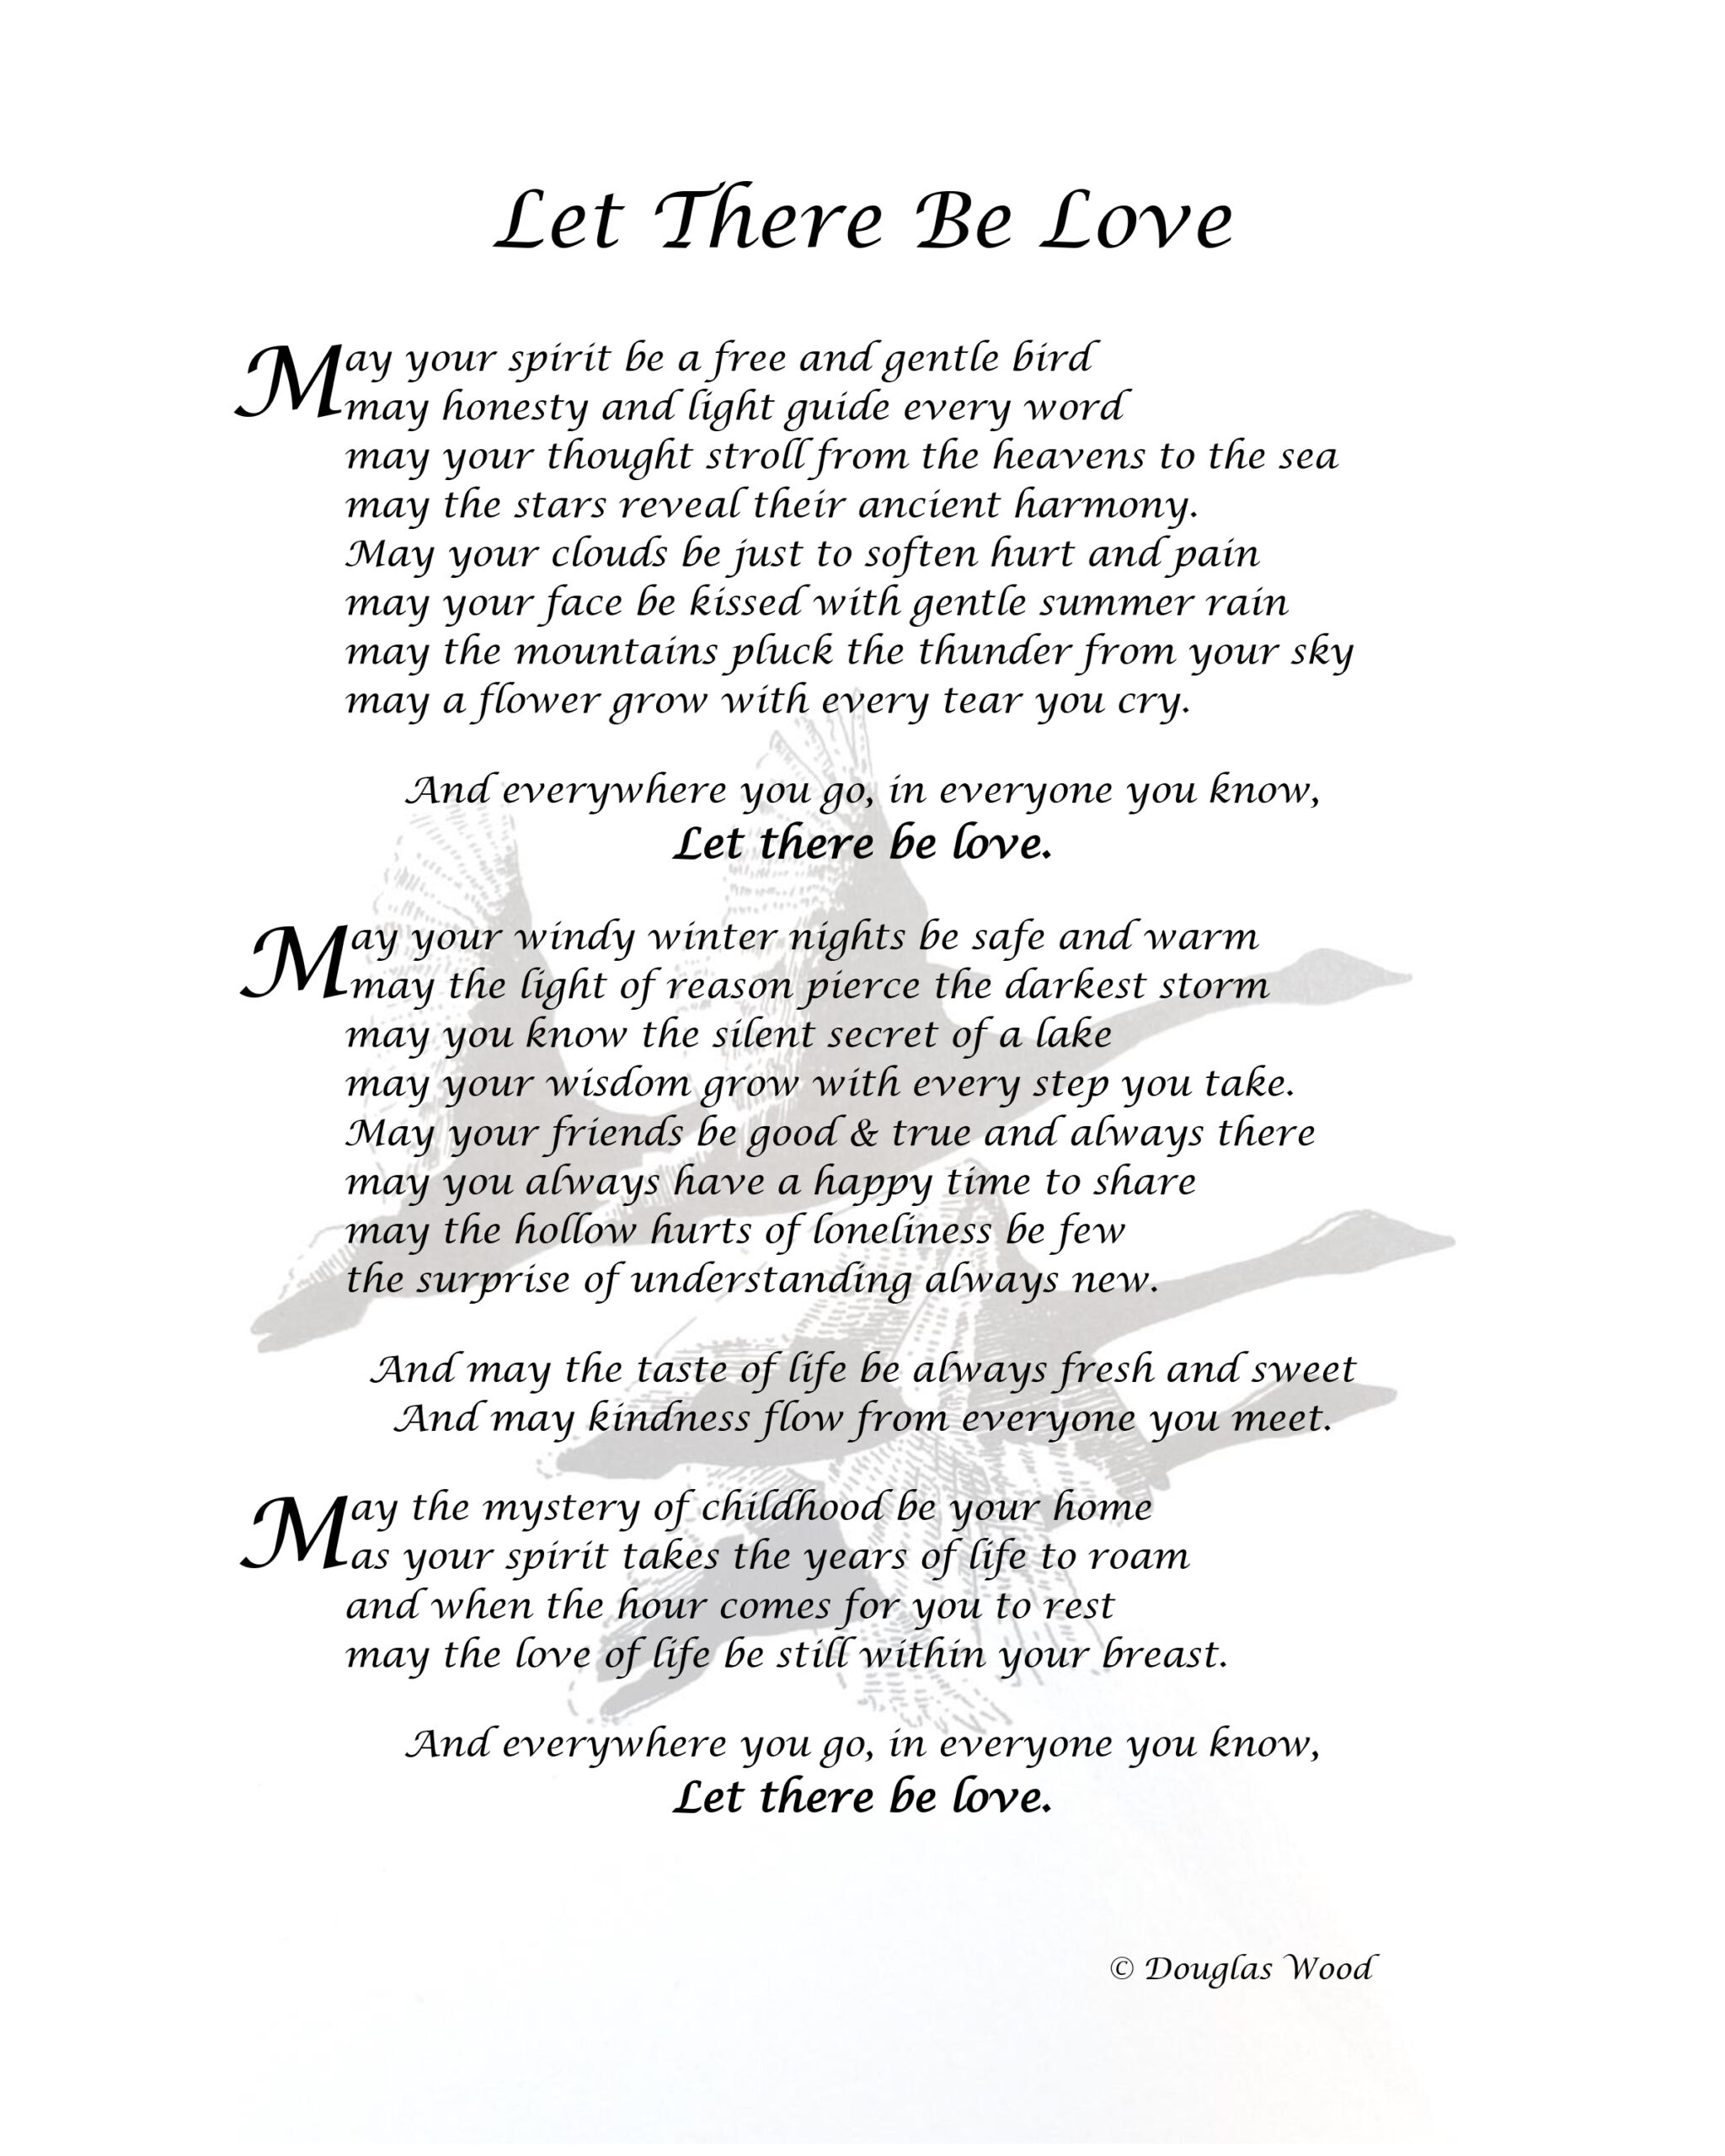 Featured image for “‘Let There Be Love’ (originally Sarah’s Prayer) Poem by Douglas Wood 8 x 10 Poster”